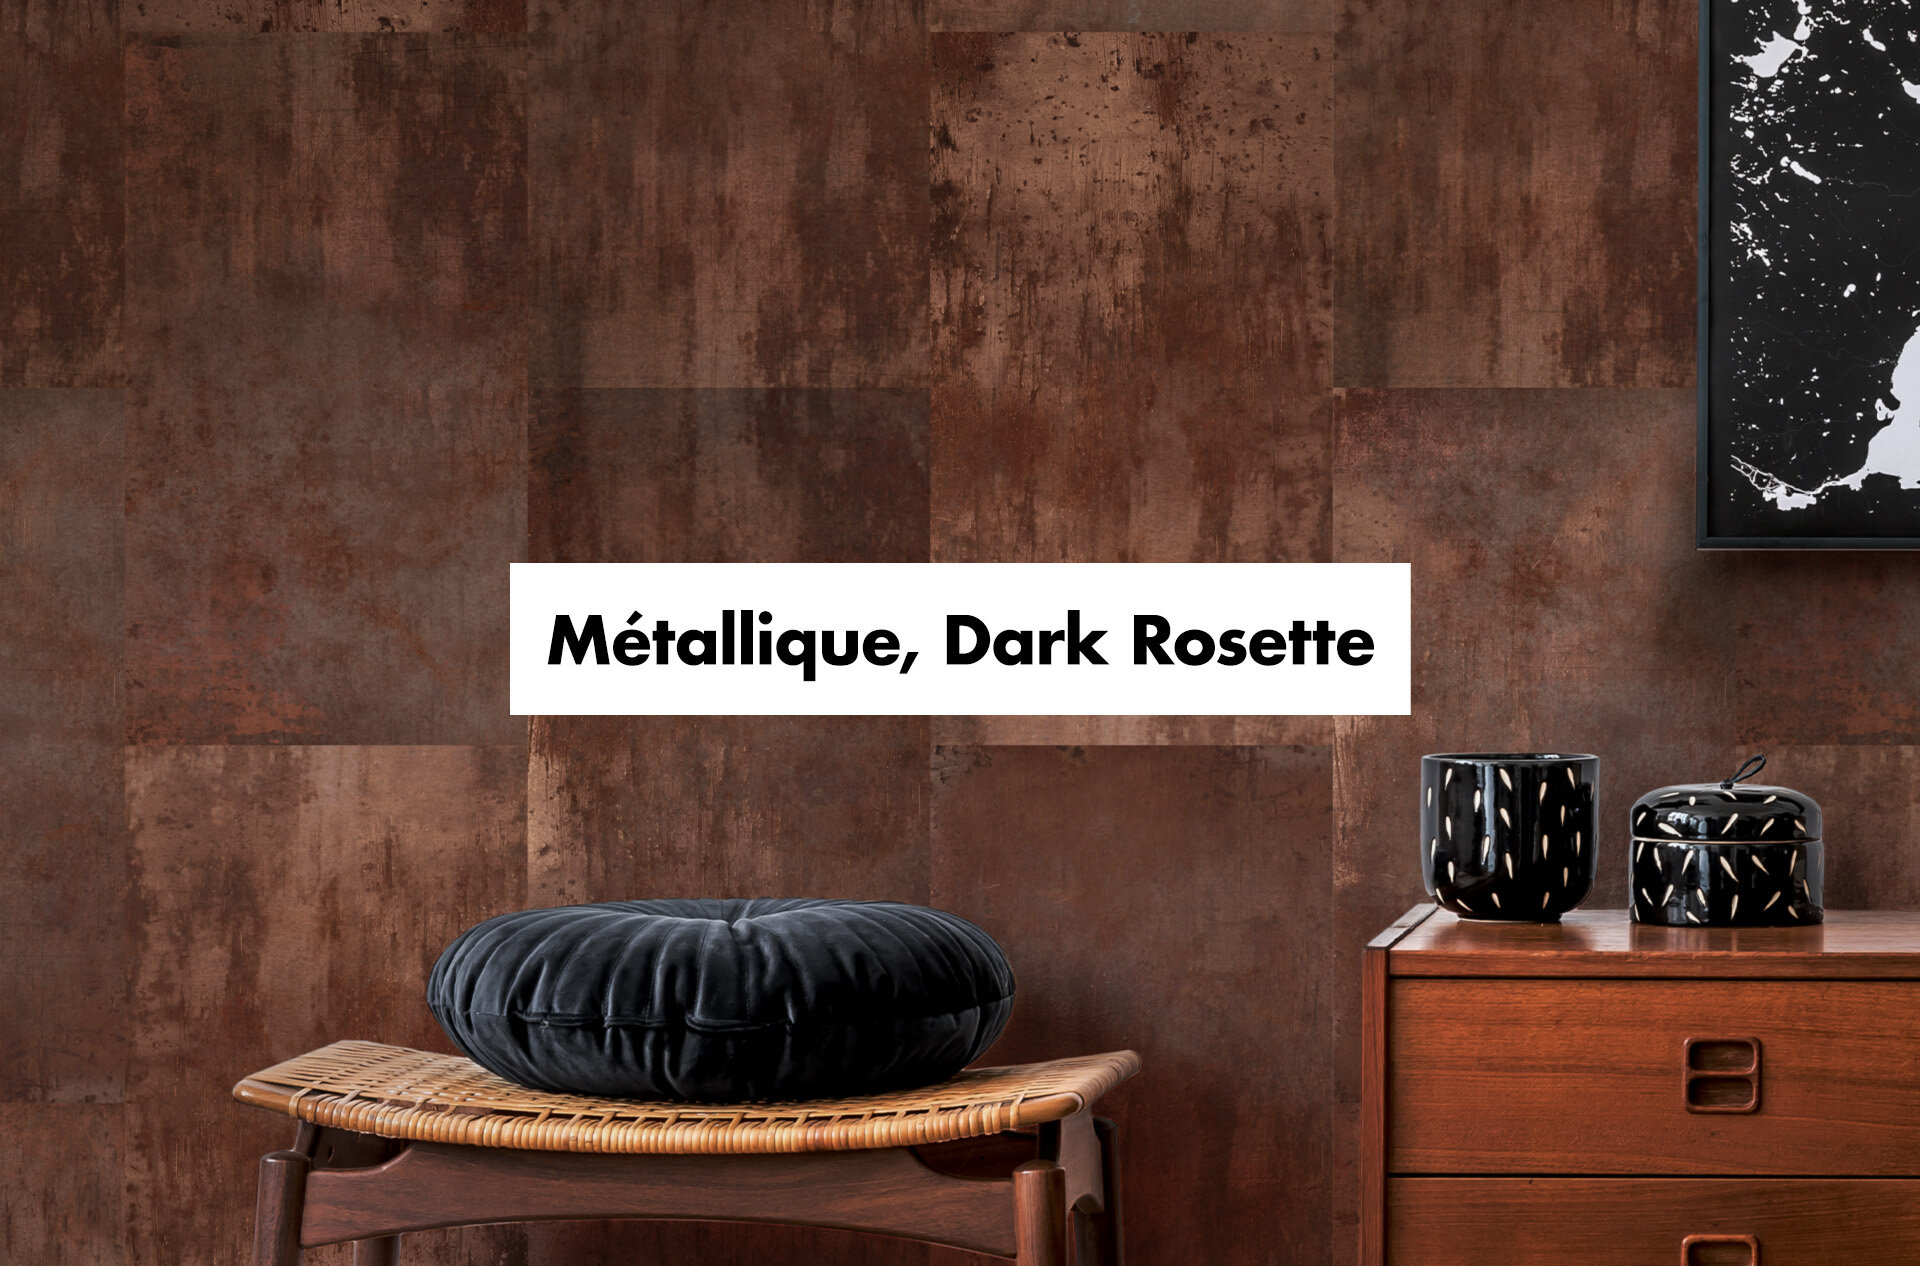 Tempered brilliance beams rich and warm from weathered, oxidized metals.